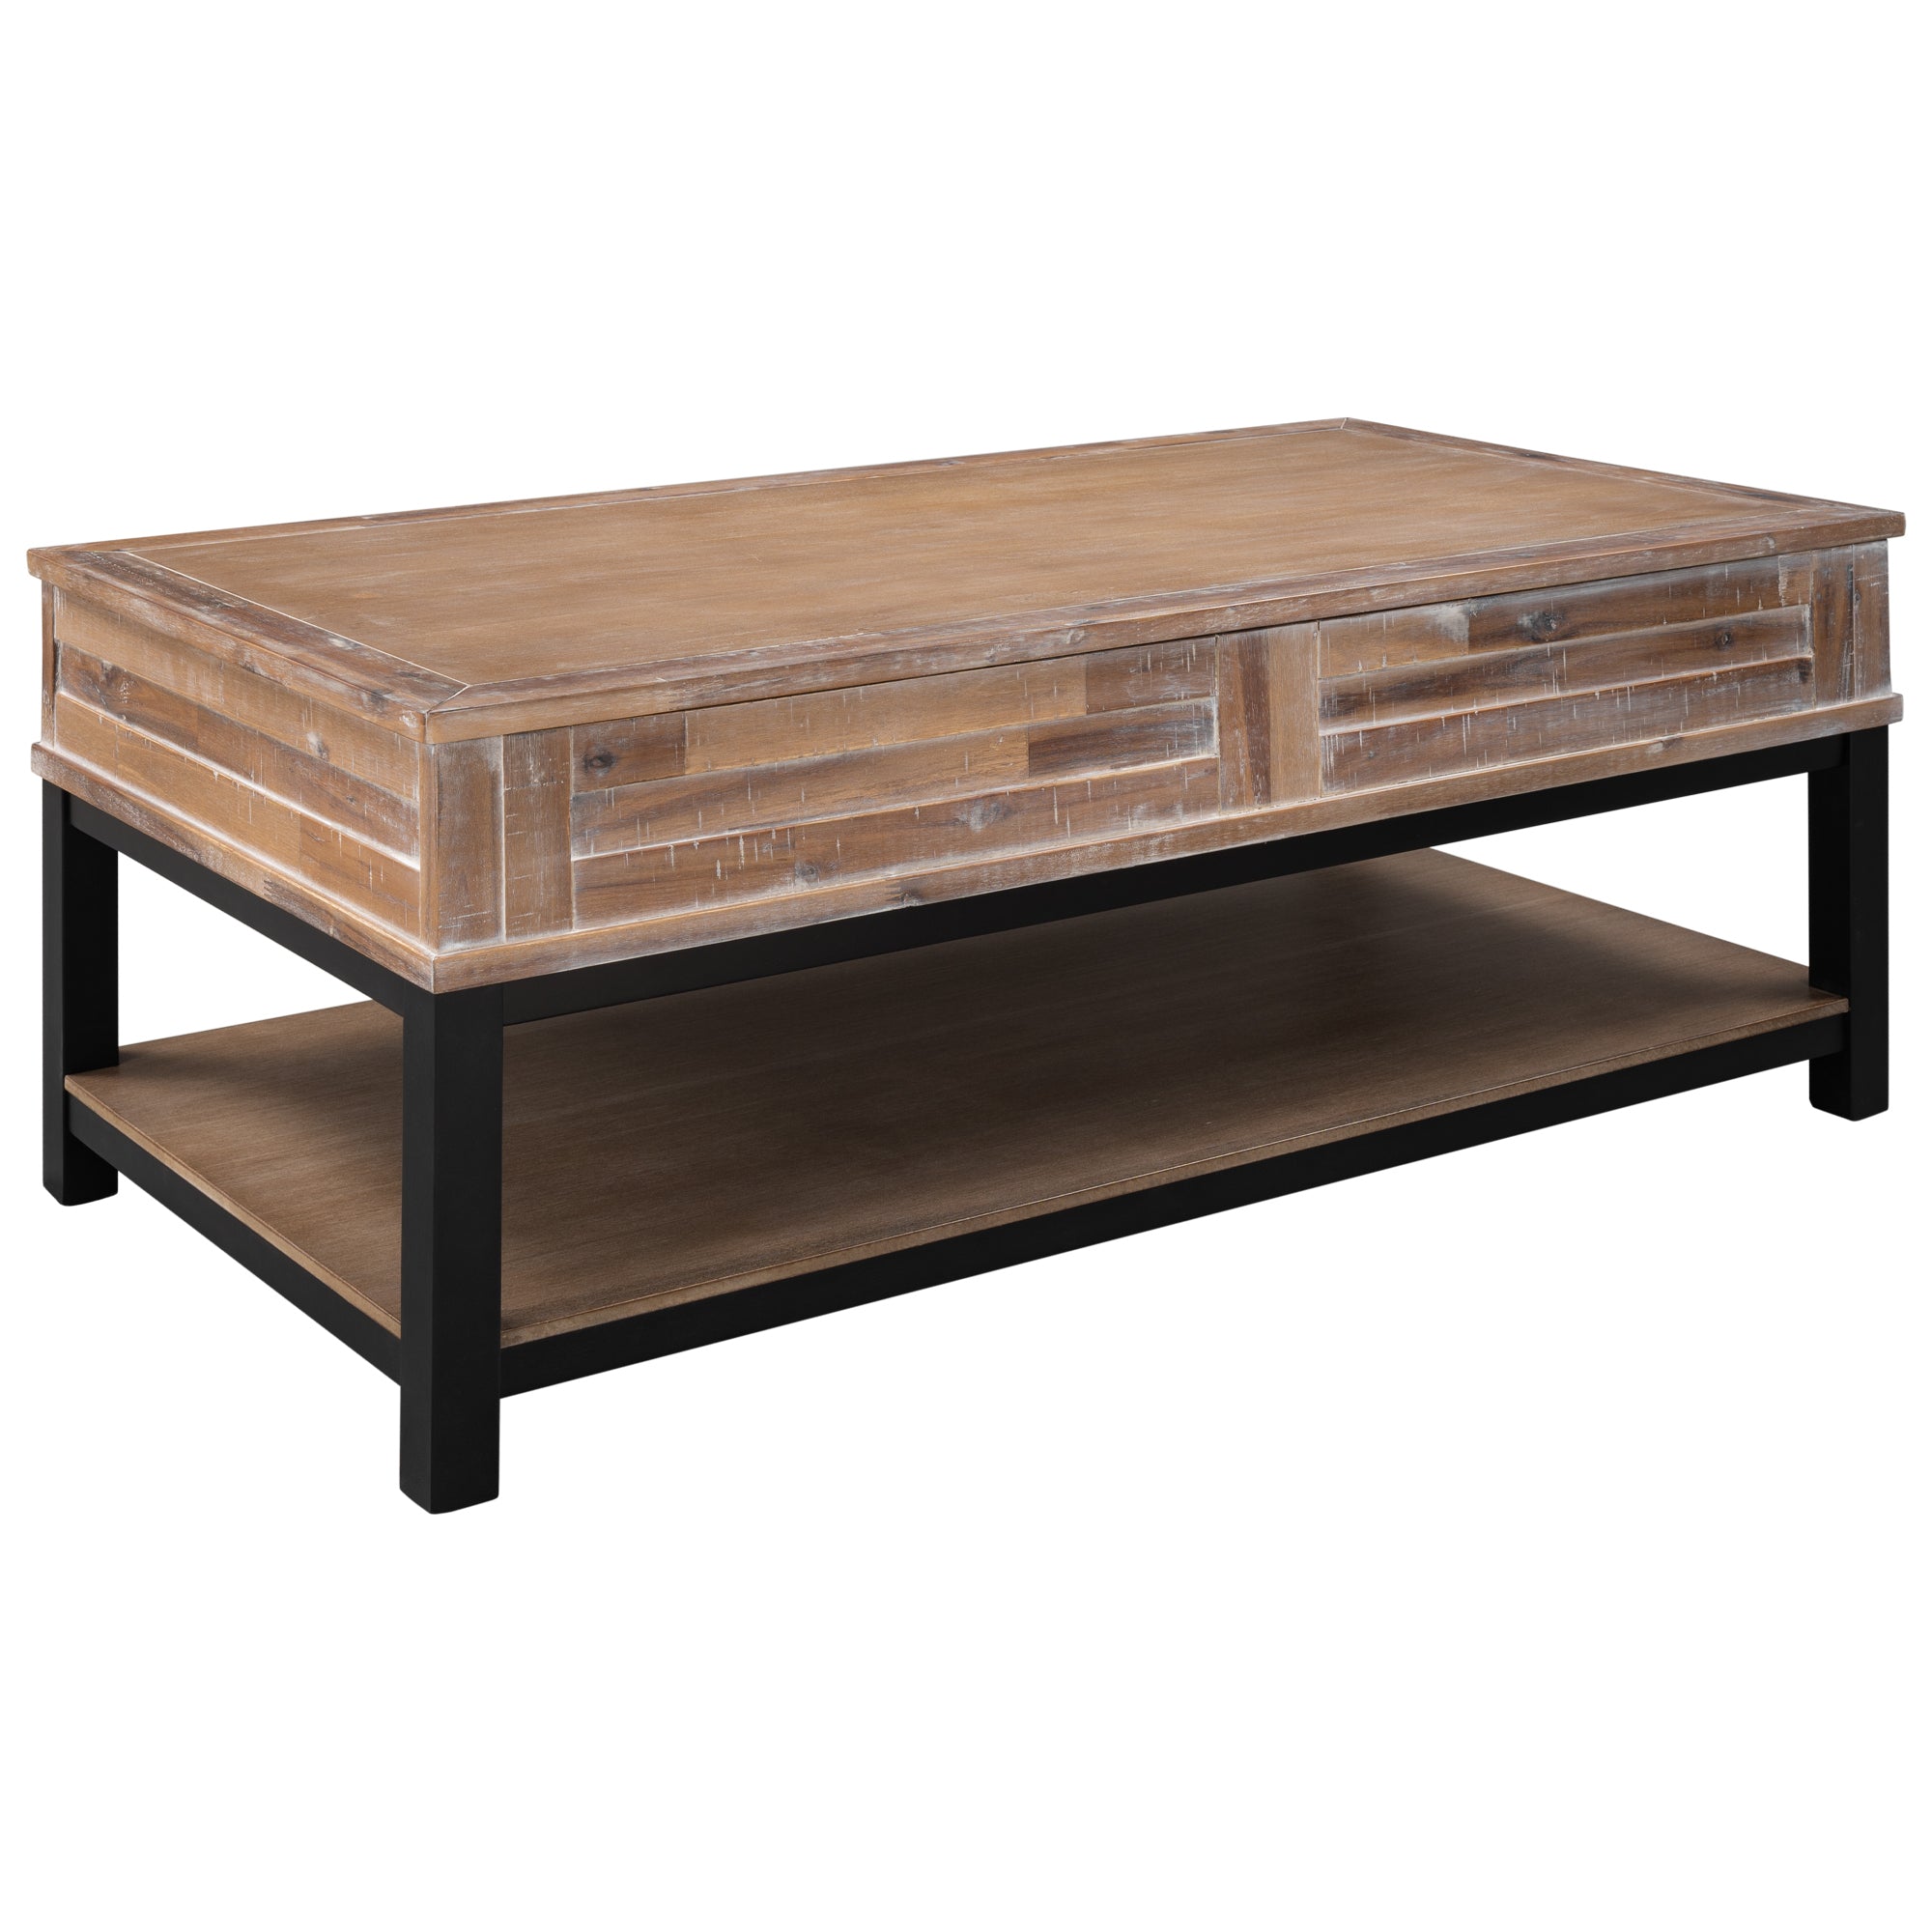 Lift Top Coffee Table with Inner Storage Space and Shelf